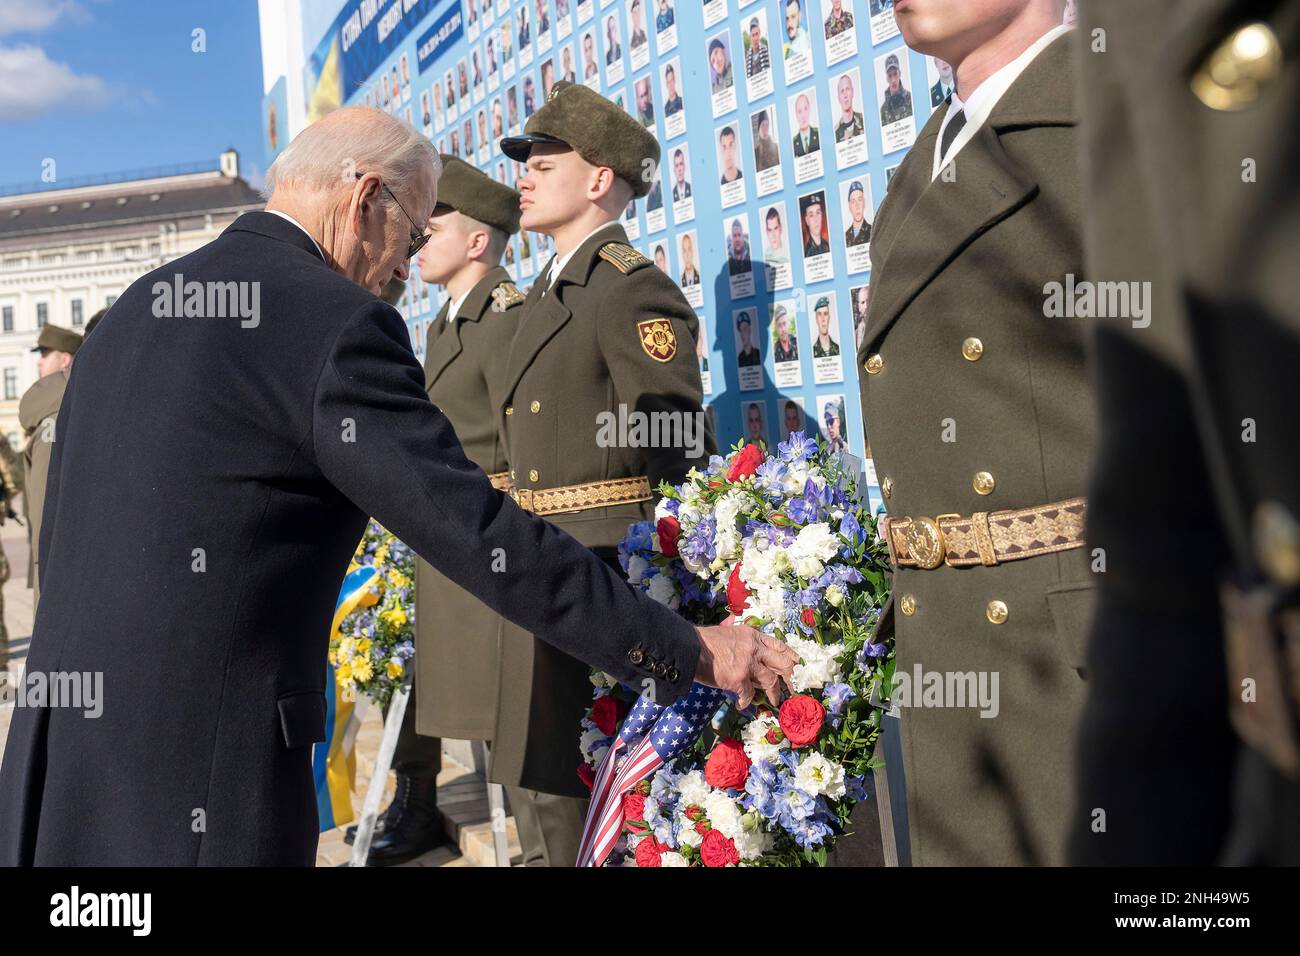 Kyiv, Ukraine. 20th Feb, 2023. U.S. President Joe Biden, left, takes part in a wreath ceremony at the Wall of Remembrance for the victims of the Russian invasion at St. Michaels Golden-Domed Cathedral, February 20, 2023 in Kyiv, Ukraine. Biden stopped in Kiev on an unannounced visit to renew American support for Ukraine. Credit: Adam Schultz/White House Photo/Alamy Live News Stock Photo